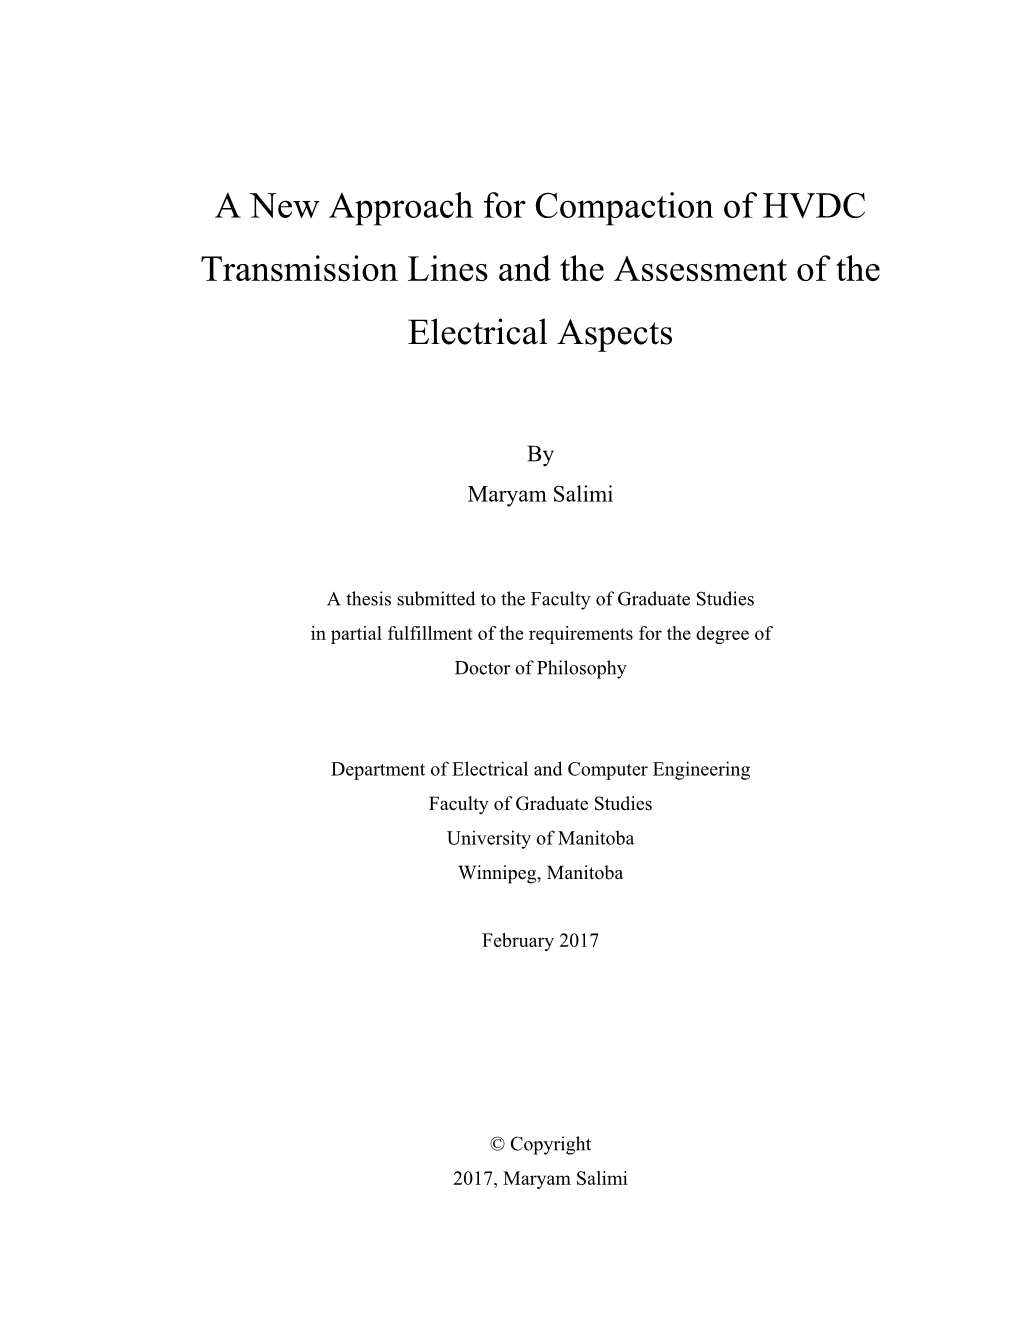 A New Approach for Compaction of HVDC Transmission Lines and the Assessment of the Electrical Aspects